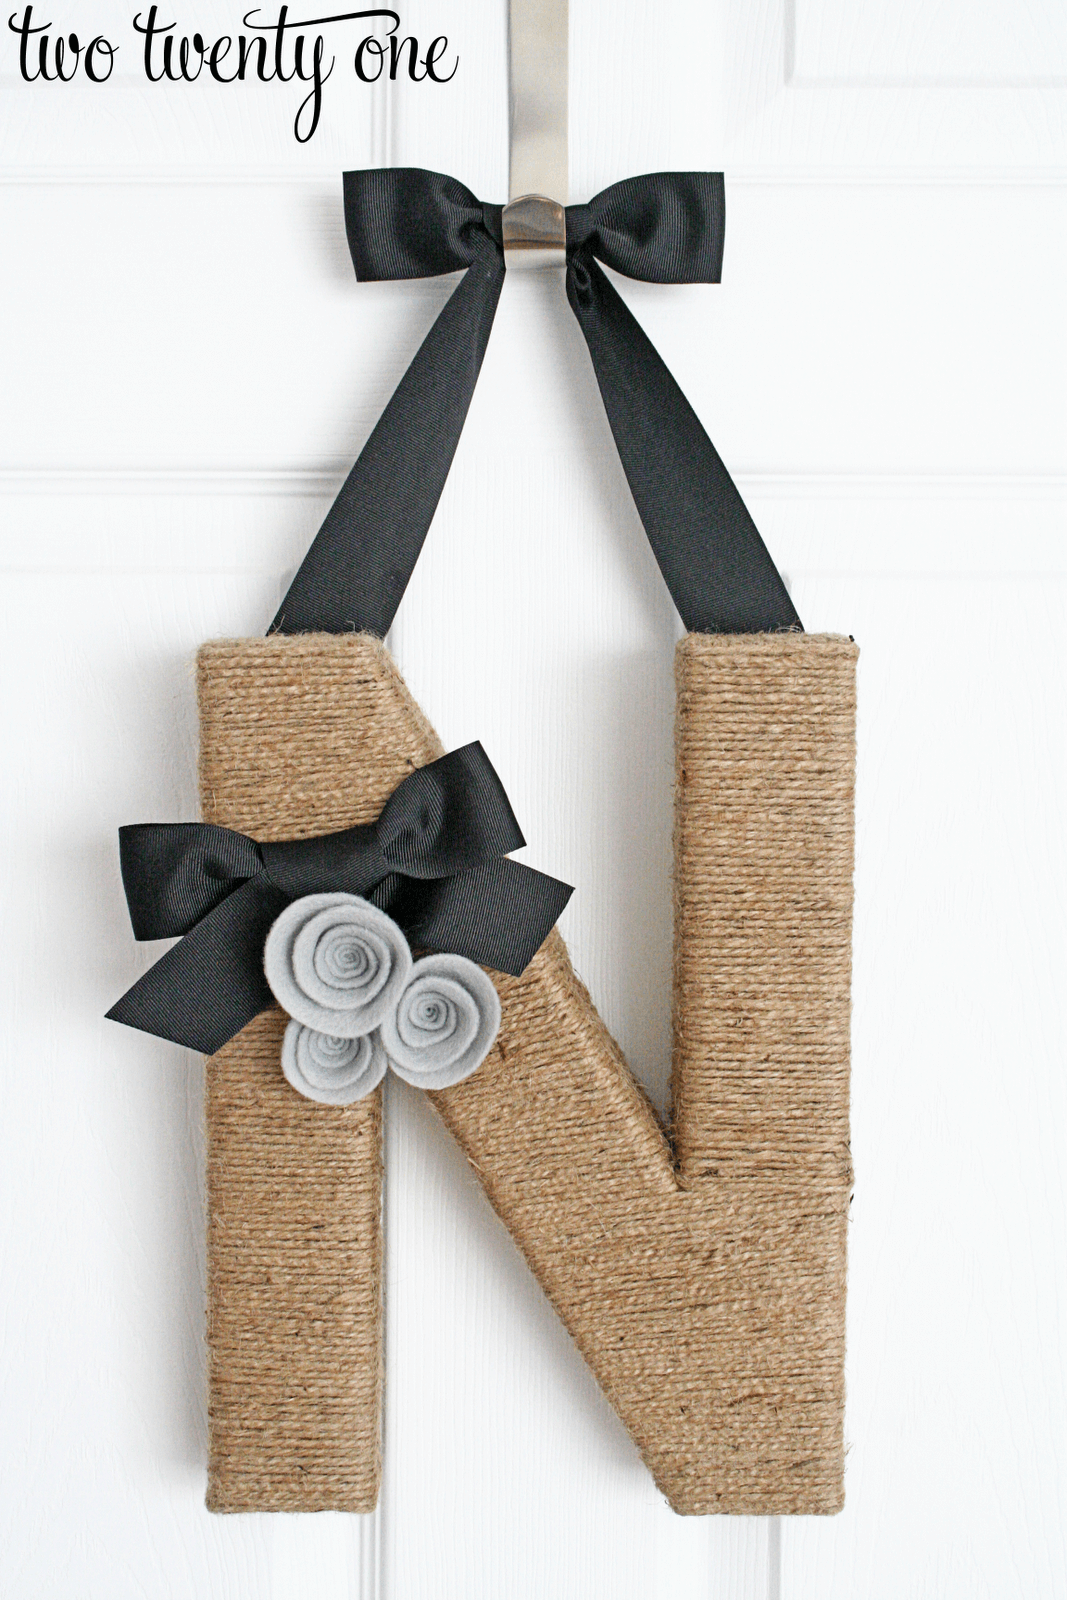 Twine Letters to Dress Up Your Door